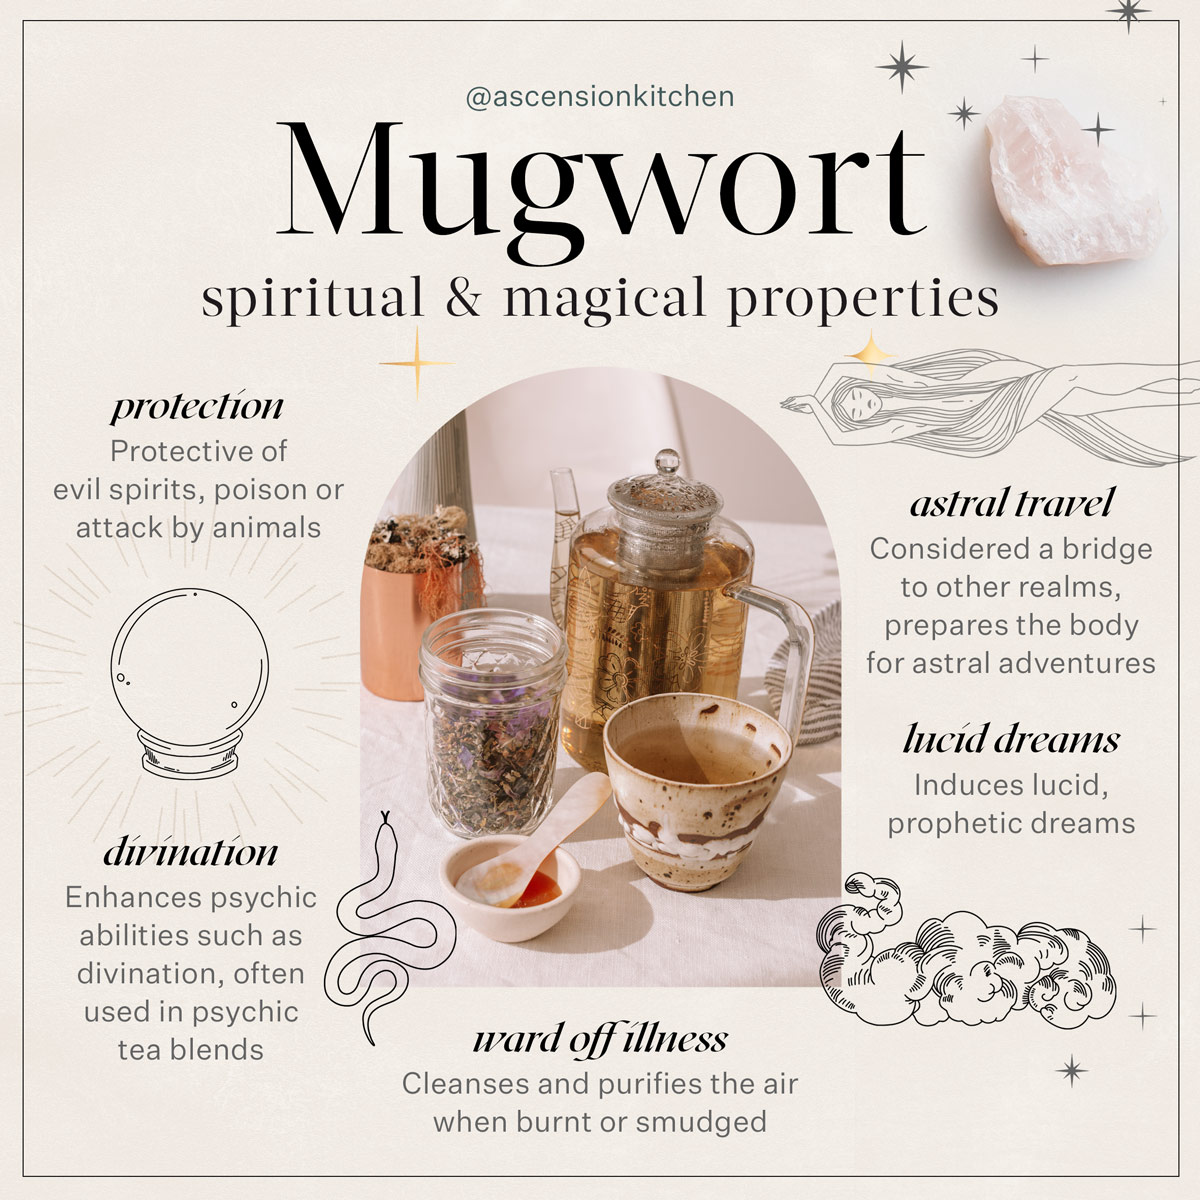 Infographic illustrating the various spiritual and magical properties of the dreaming herb, mugwort.